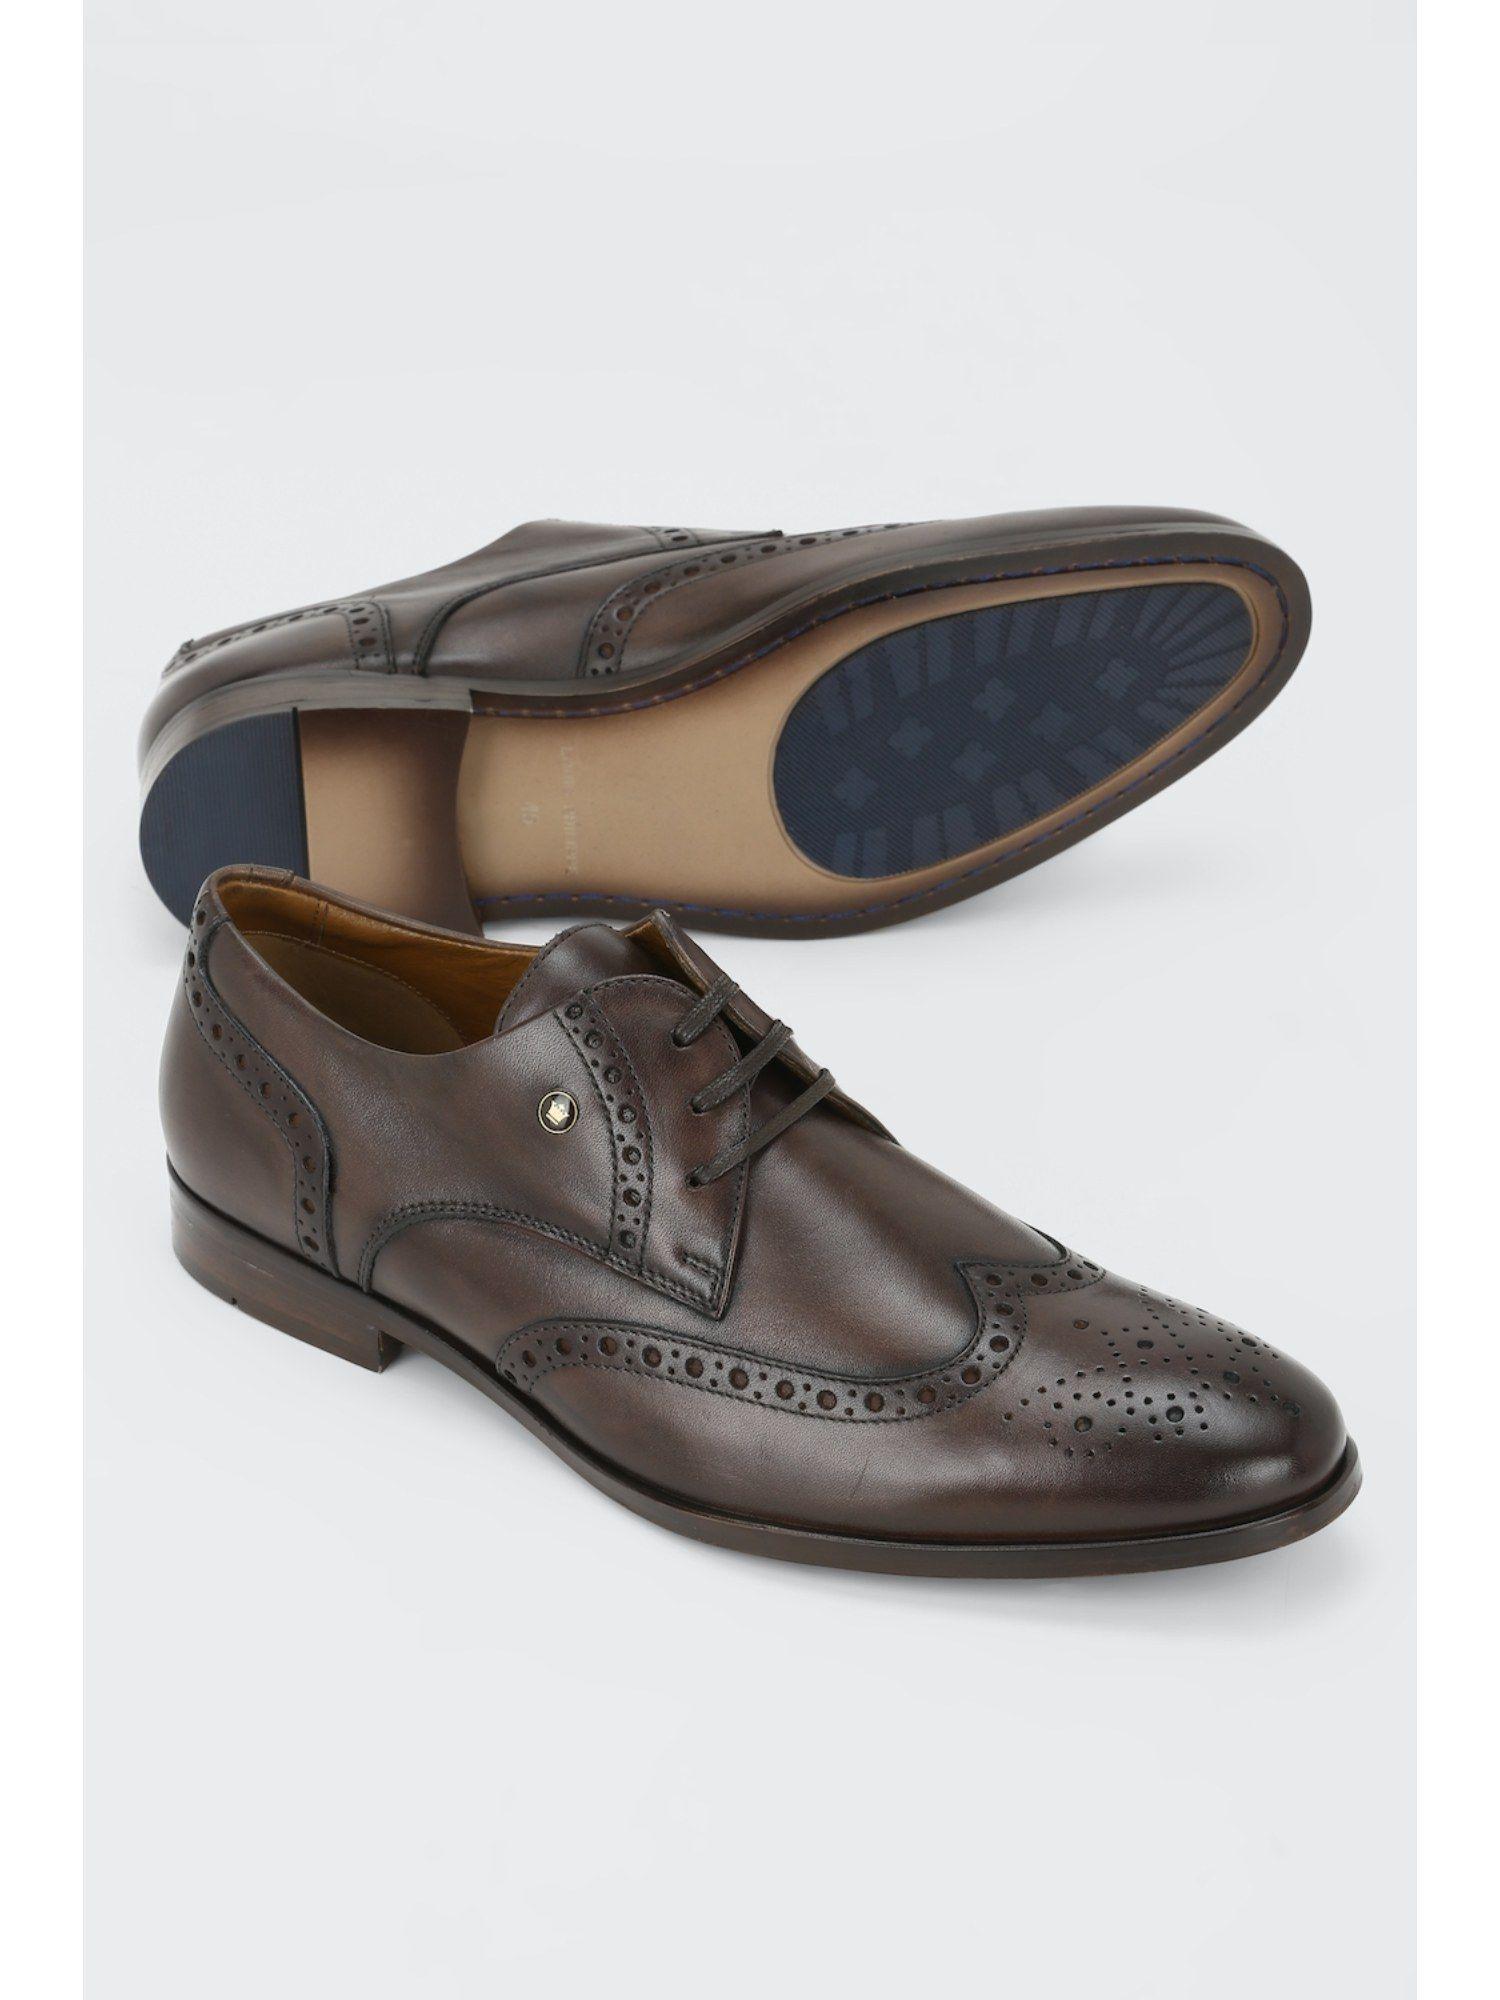 brown lace up shoes